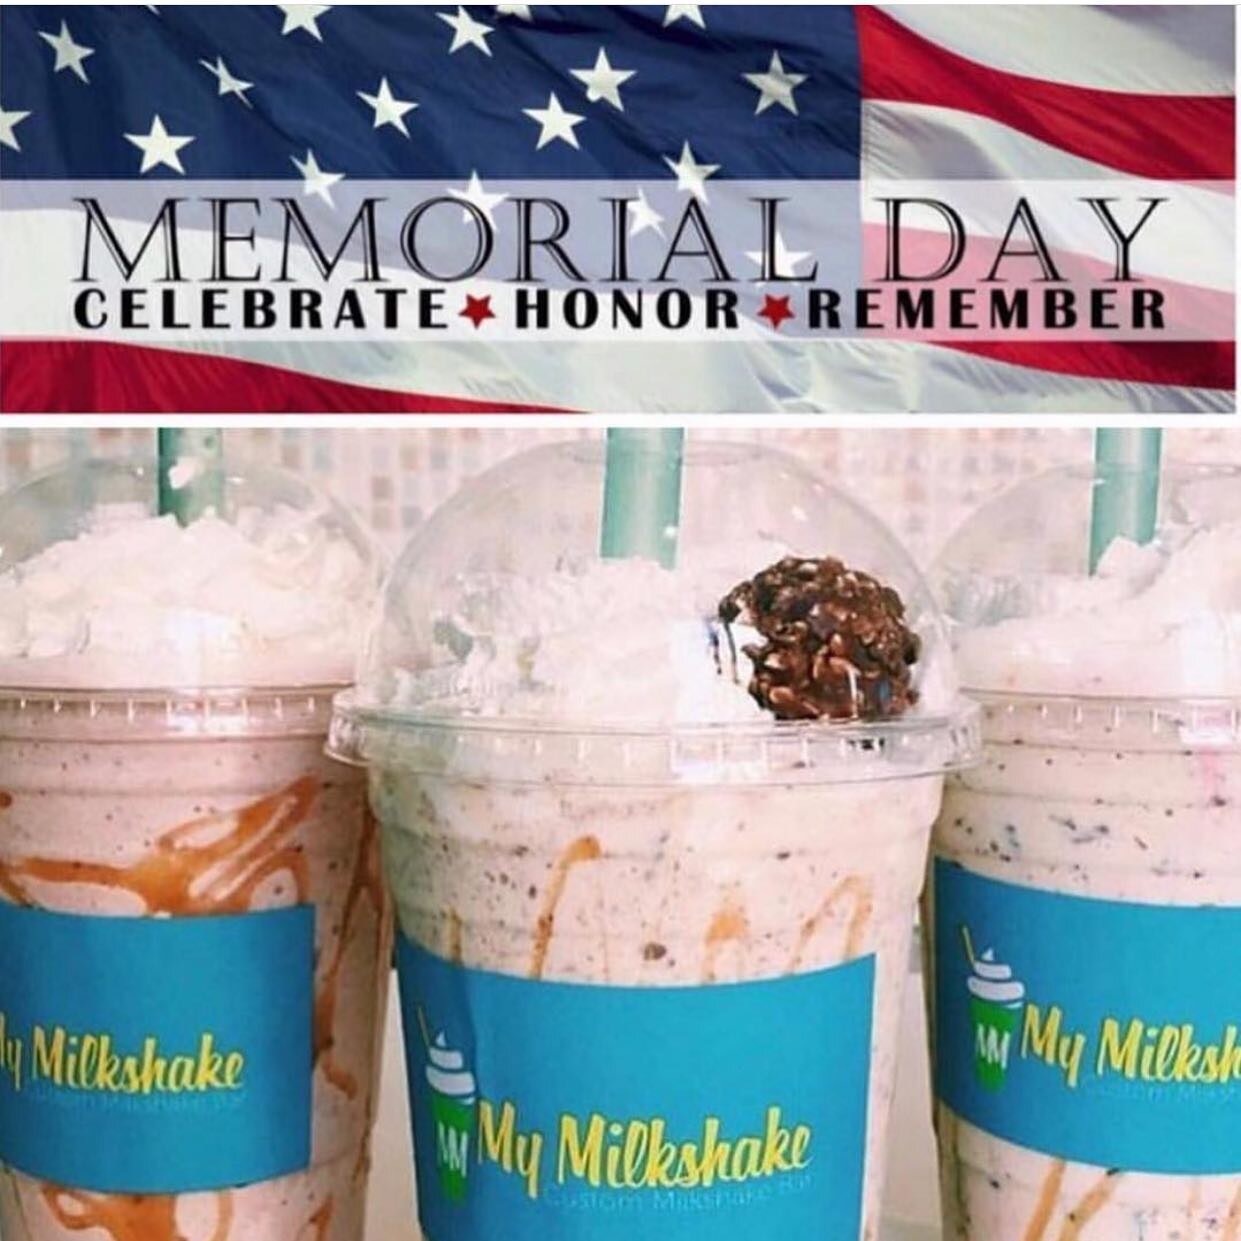 We are open today - Happy Memorial Day! 🇺🇸🇺🇸🇺🇸- let us remember all those who serve our country and those who lost their lives doing so - #MemorialDay #2020 #Celebrate #Honor #Remember #MyMilkshakeSJ